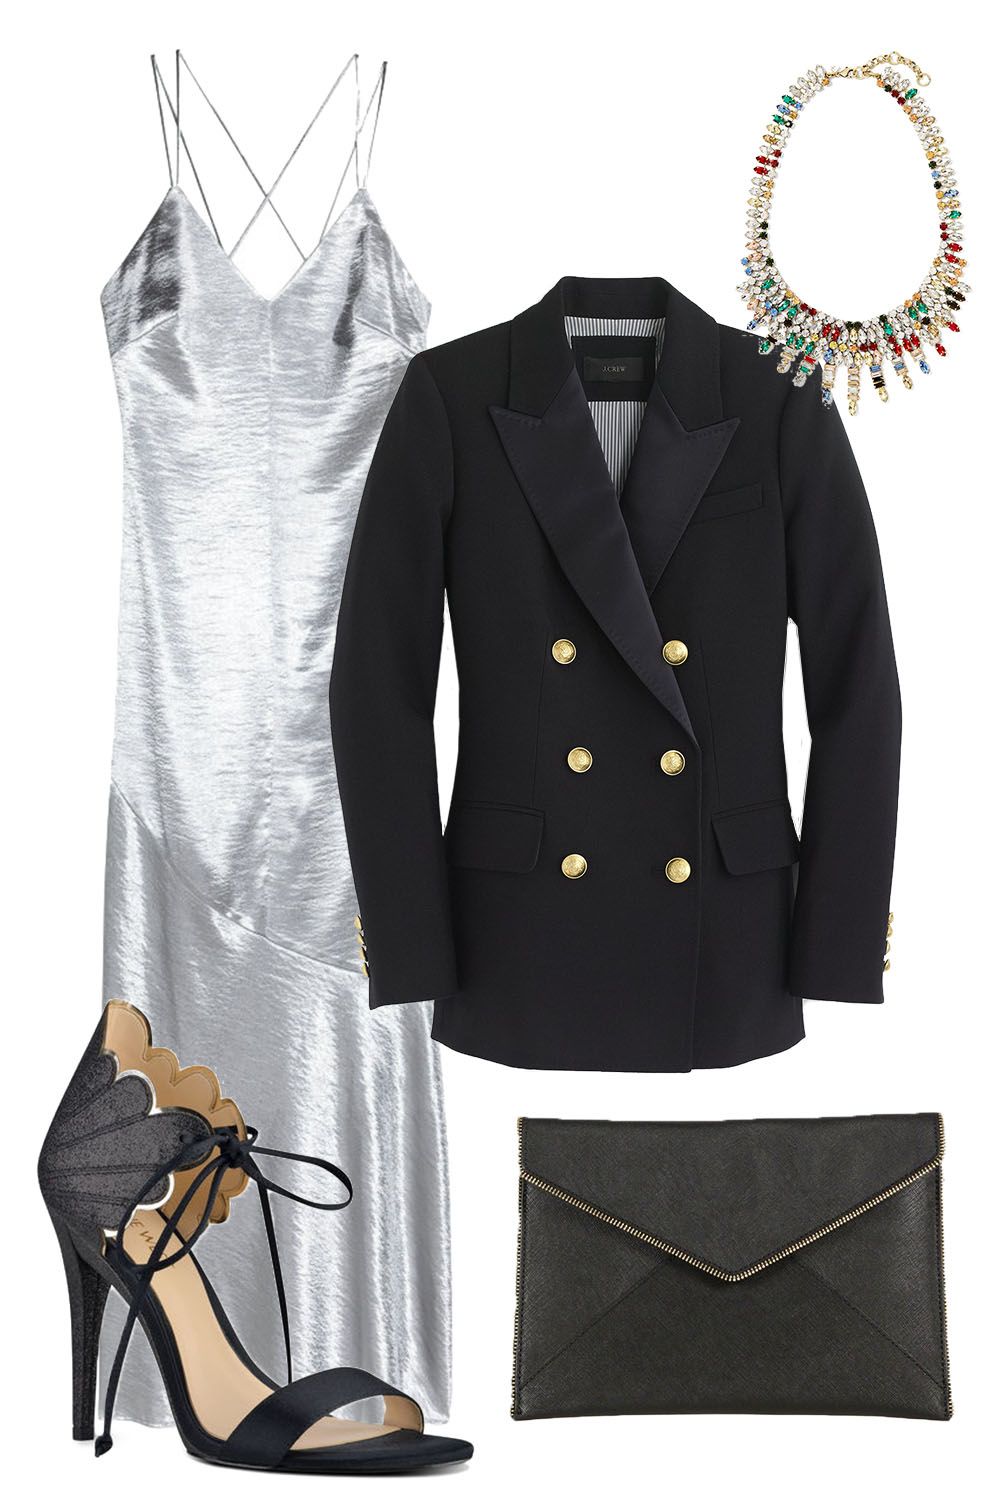 5 Last-Minute NYE Outfit Ideas Using Staples You Already Have